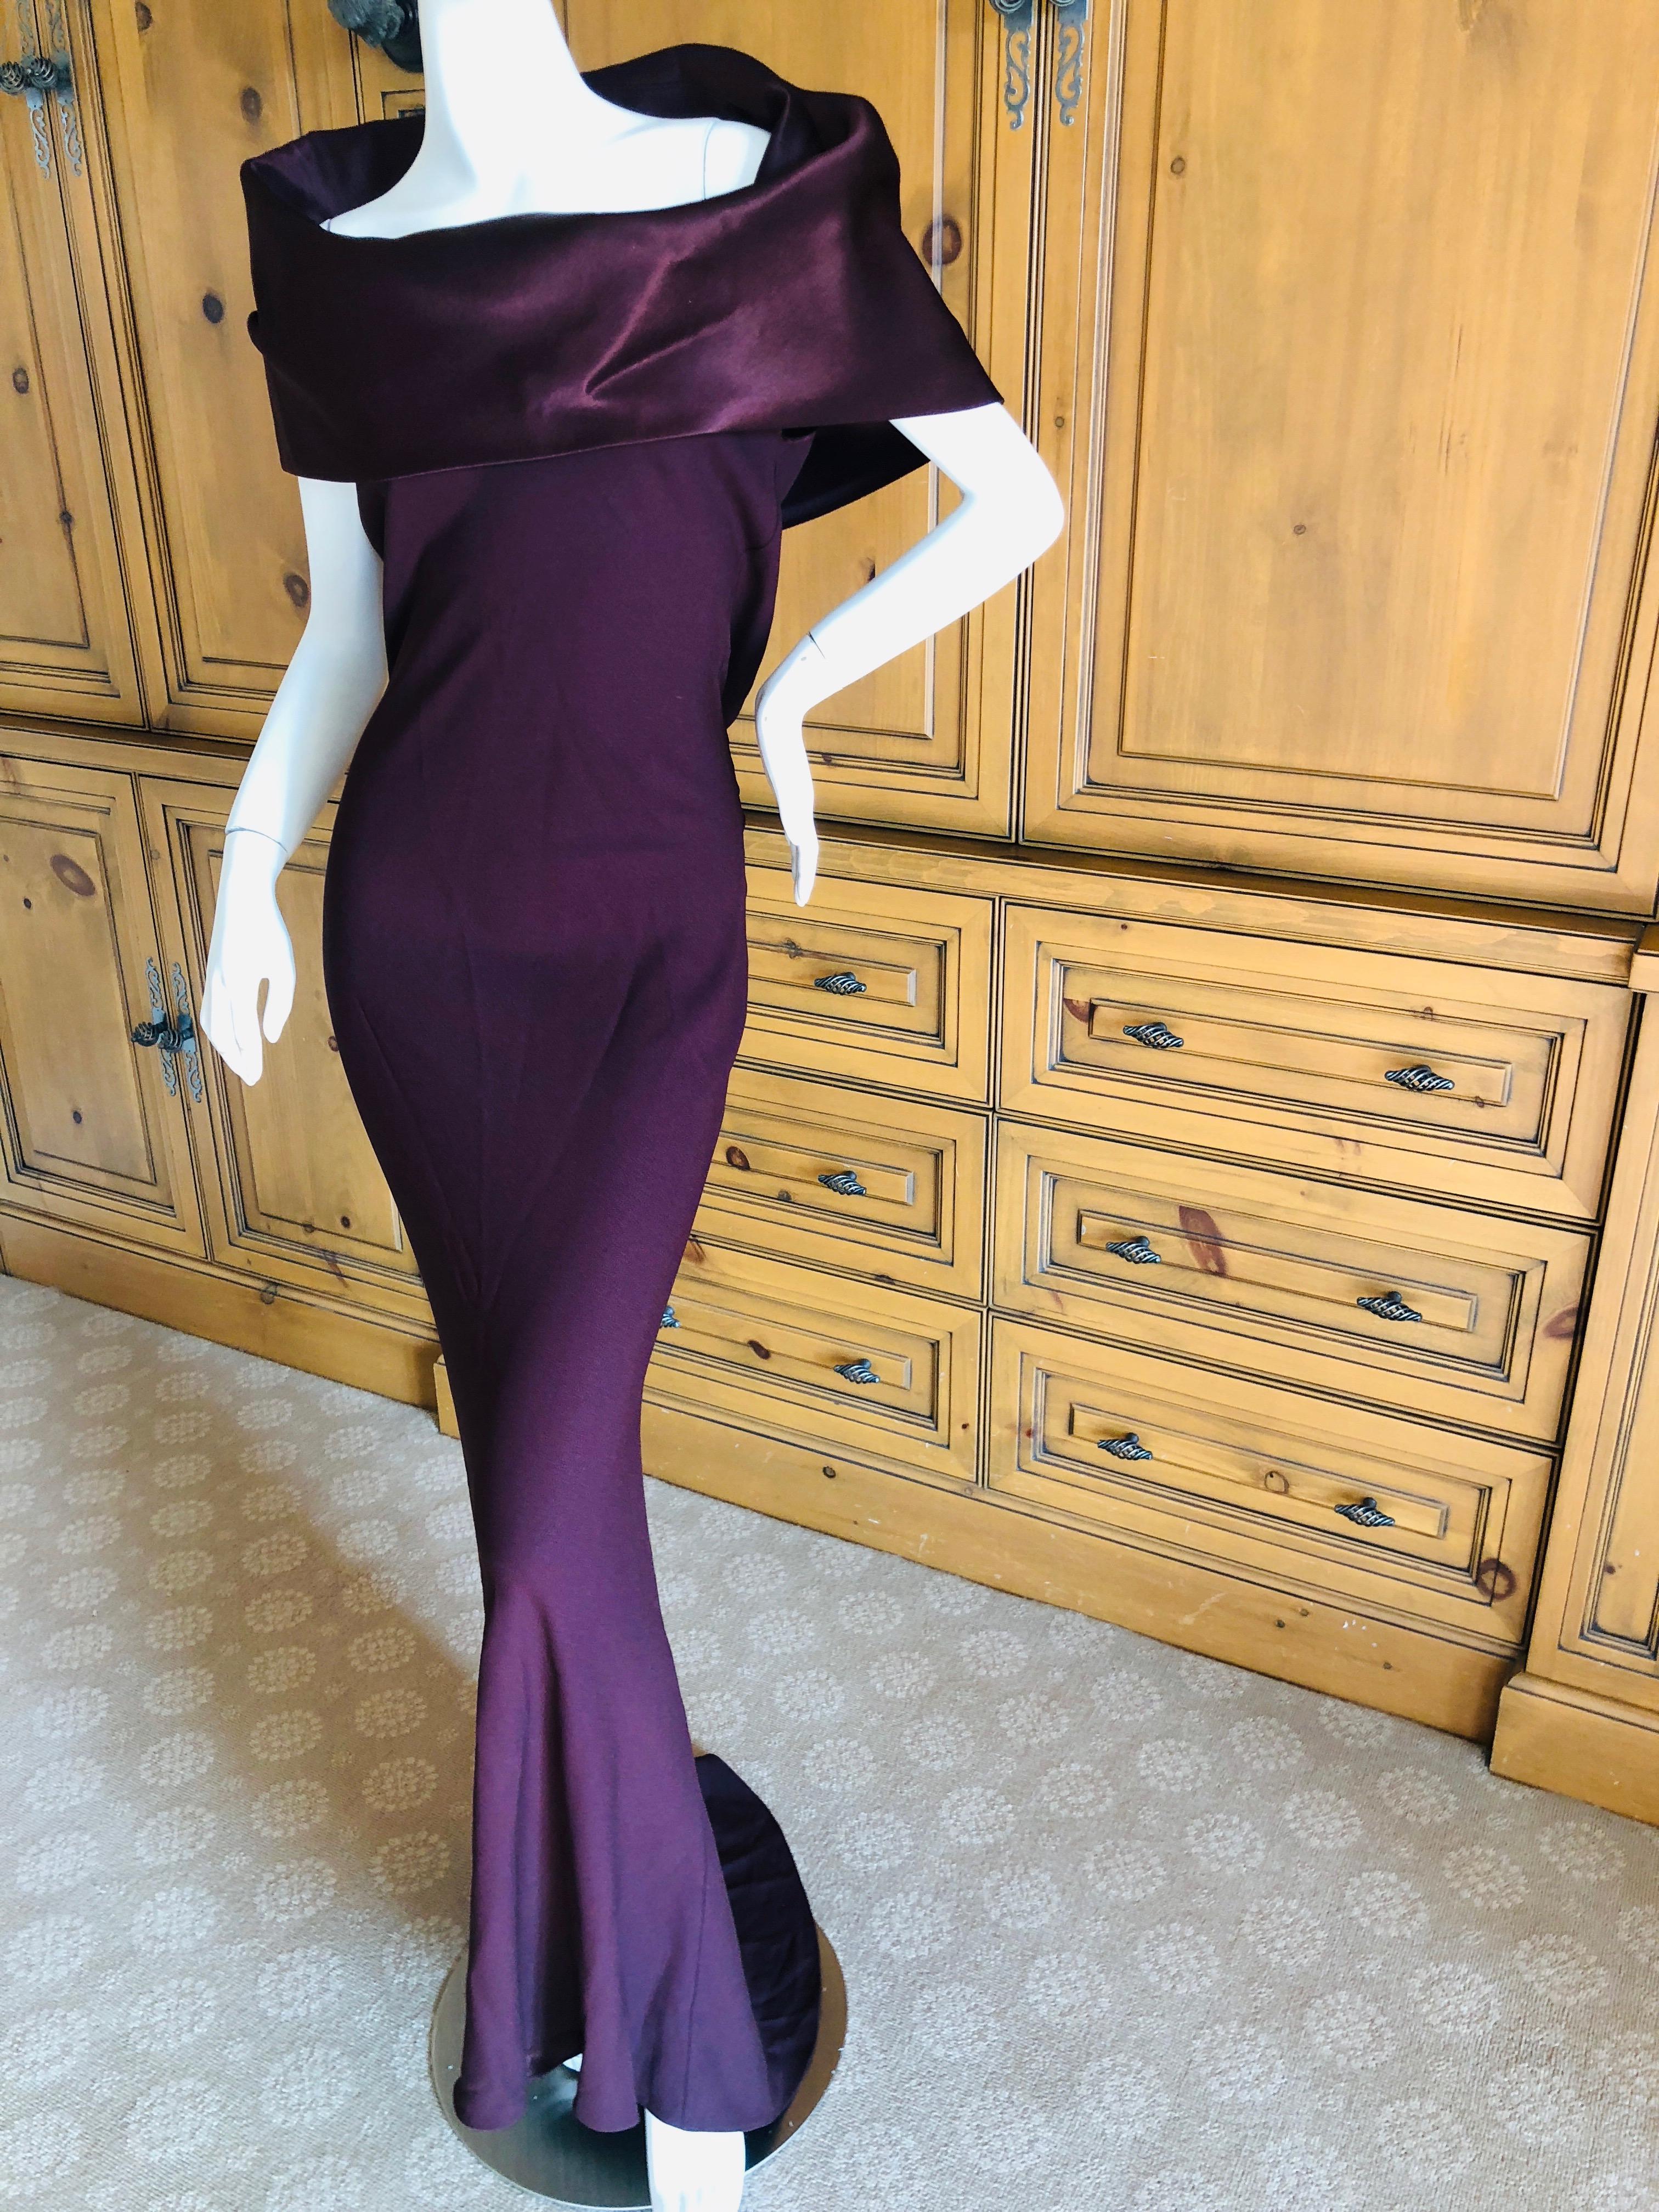  John Galliano 1990's Aubergine Cowl Collar Bias Cut Evening Dress
So much prettier in person. Please use zoom feature to see details.
Sz 44
Bust 40